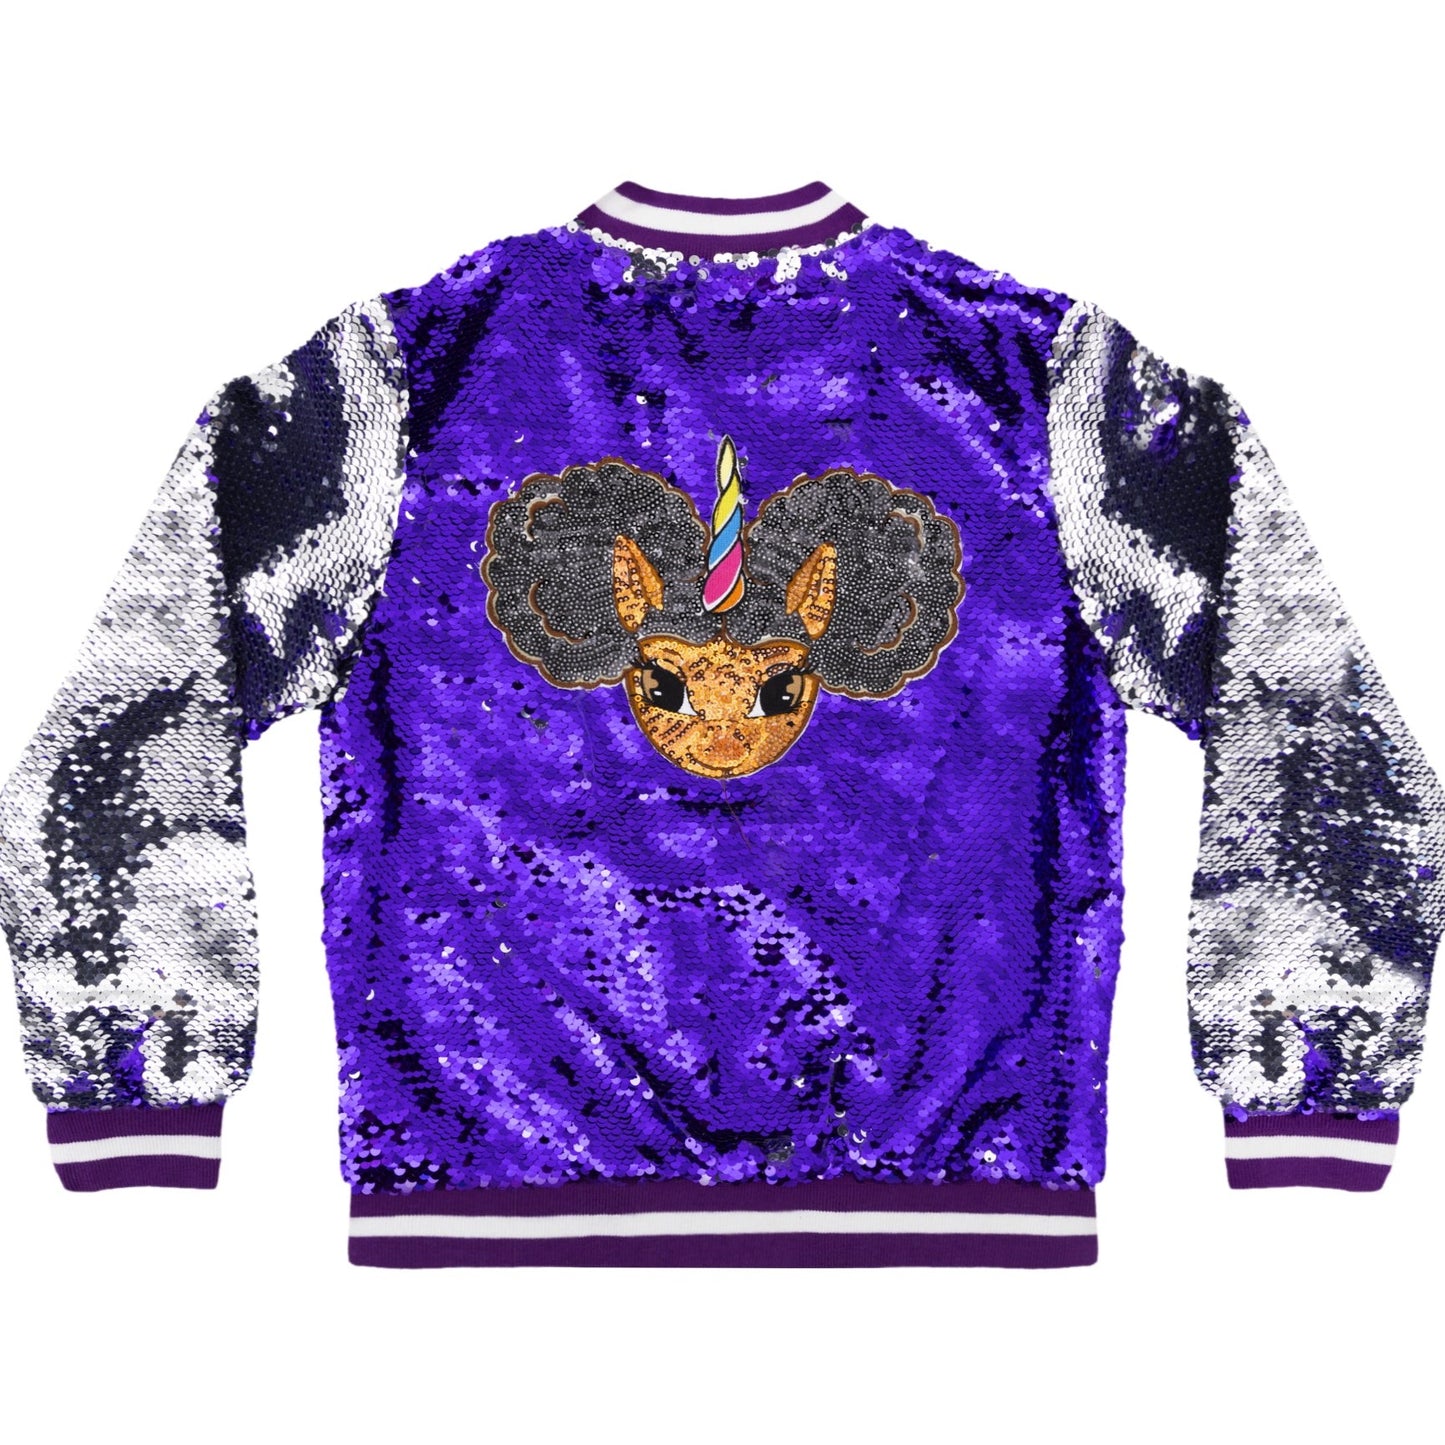 Sequin Jacket with Afro Puff Unicorn Studded Logo Patch - Pop Star Purple